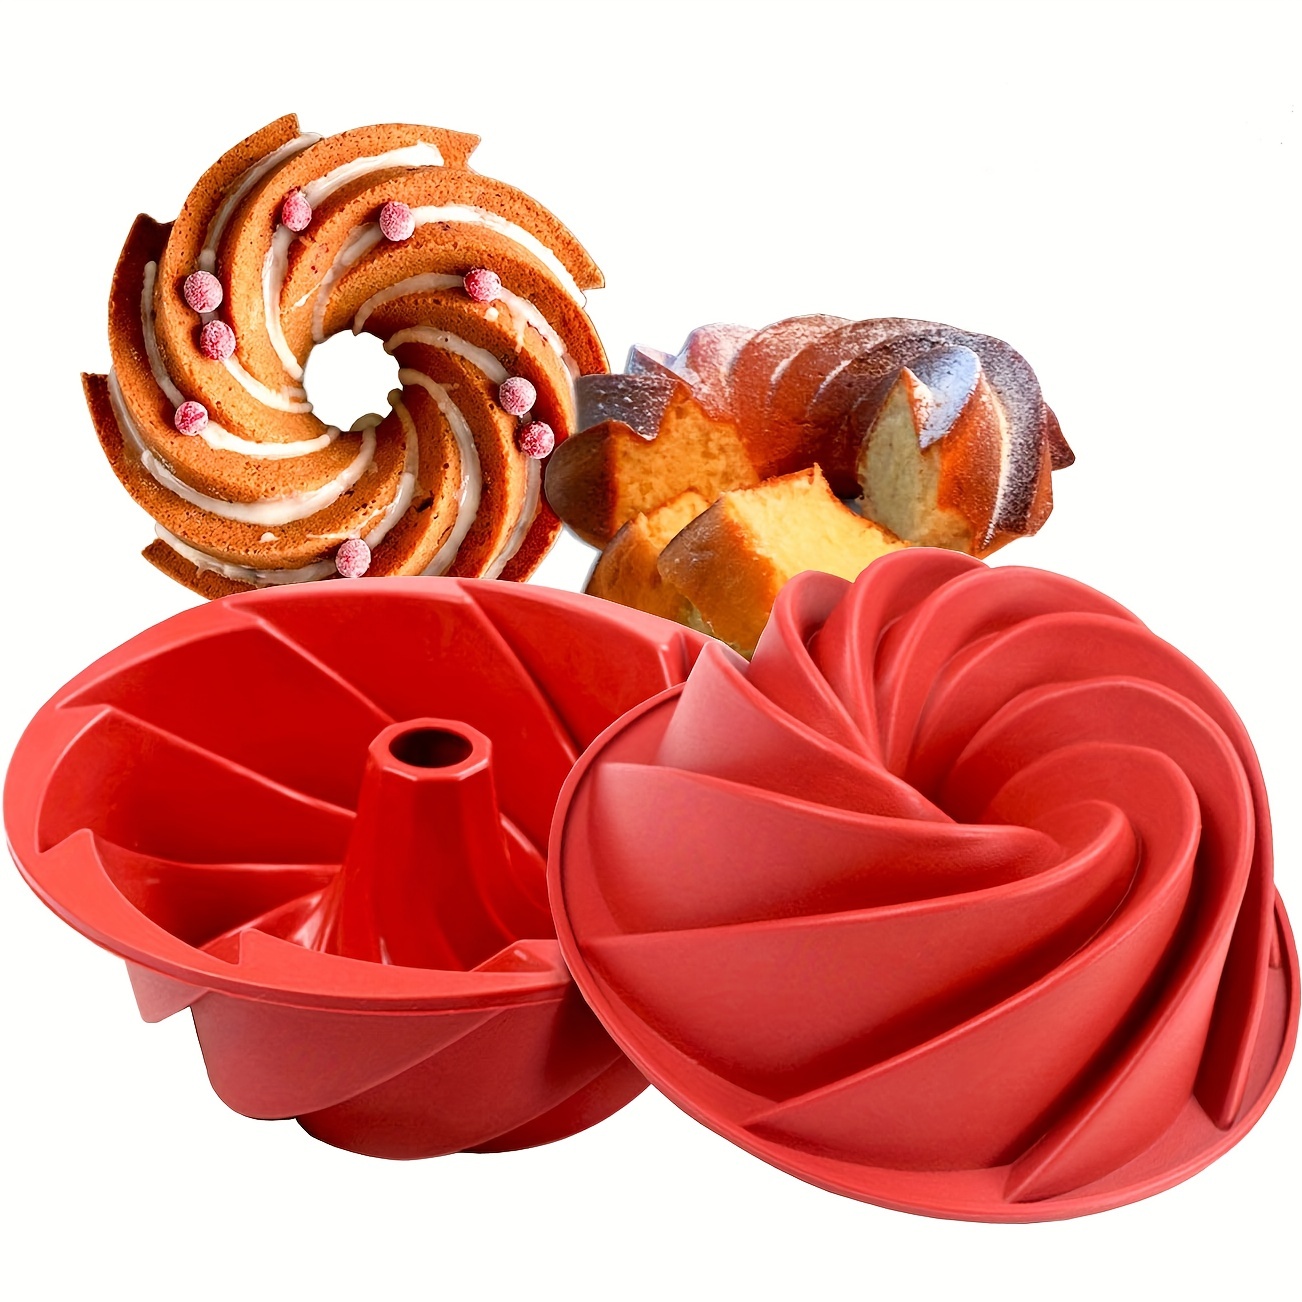 1pc, Silicone Bundt Pan (9.65''), Heritage Bundtlette Cake Mold, For Fluted  Tube Cake Making, Baking Tools, Kitchen Gadgets, Kitchen Accessories